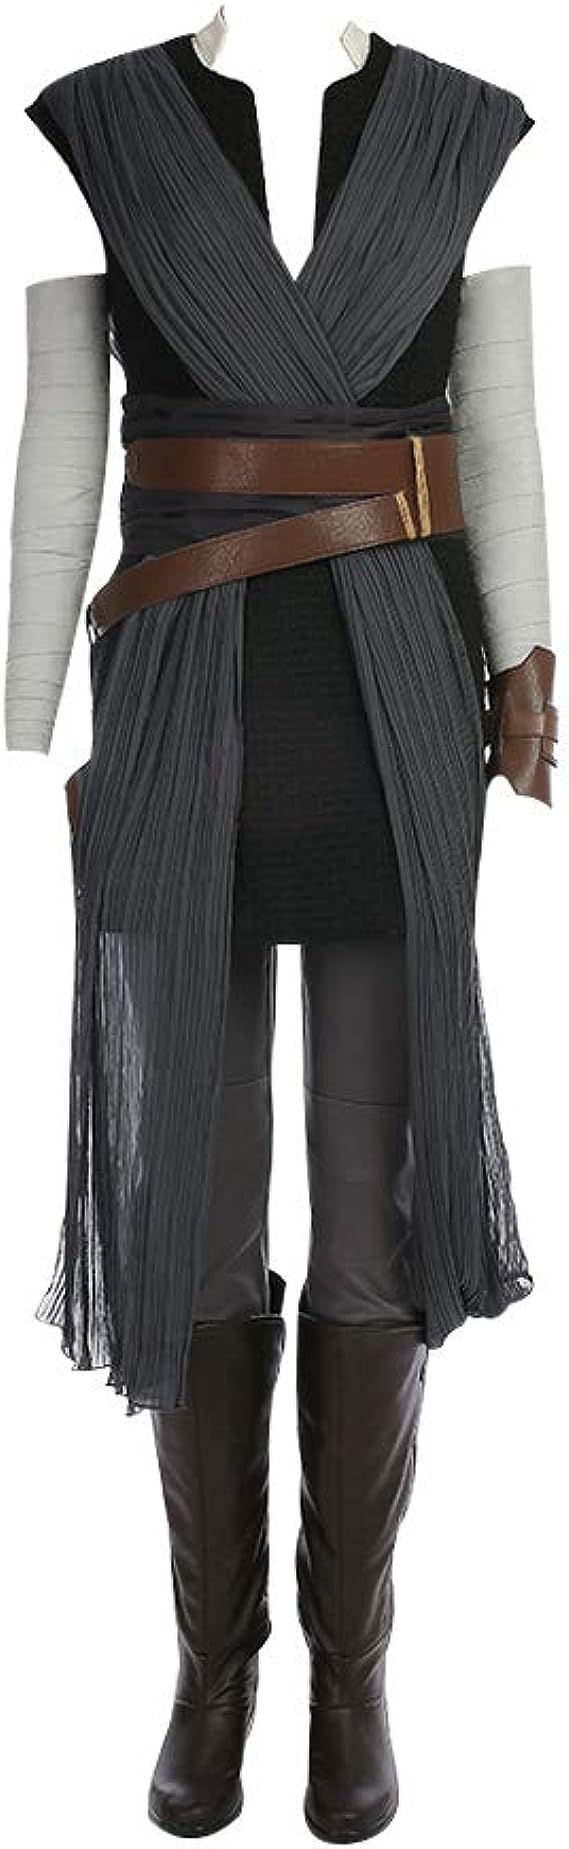 Adult Rey Cosplay Costume Full Set Outfit Halloween Costume Women XLarge